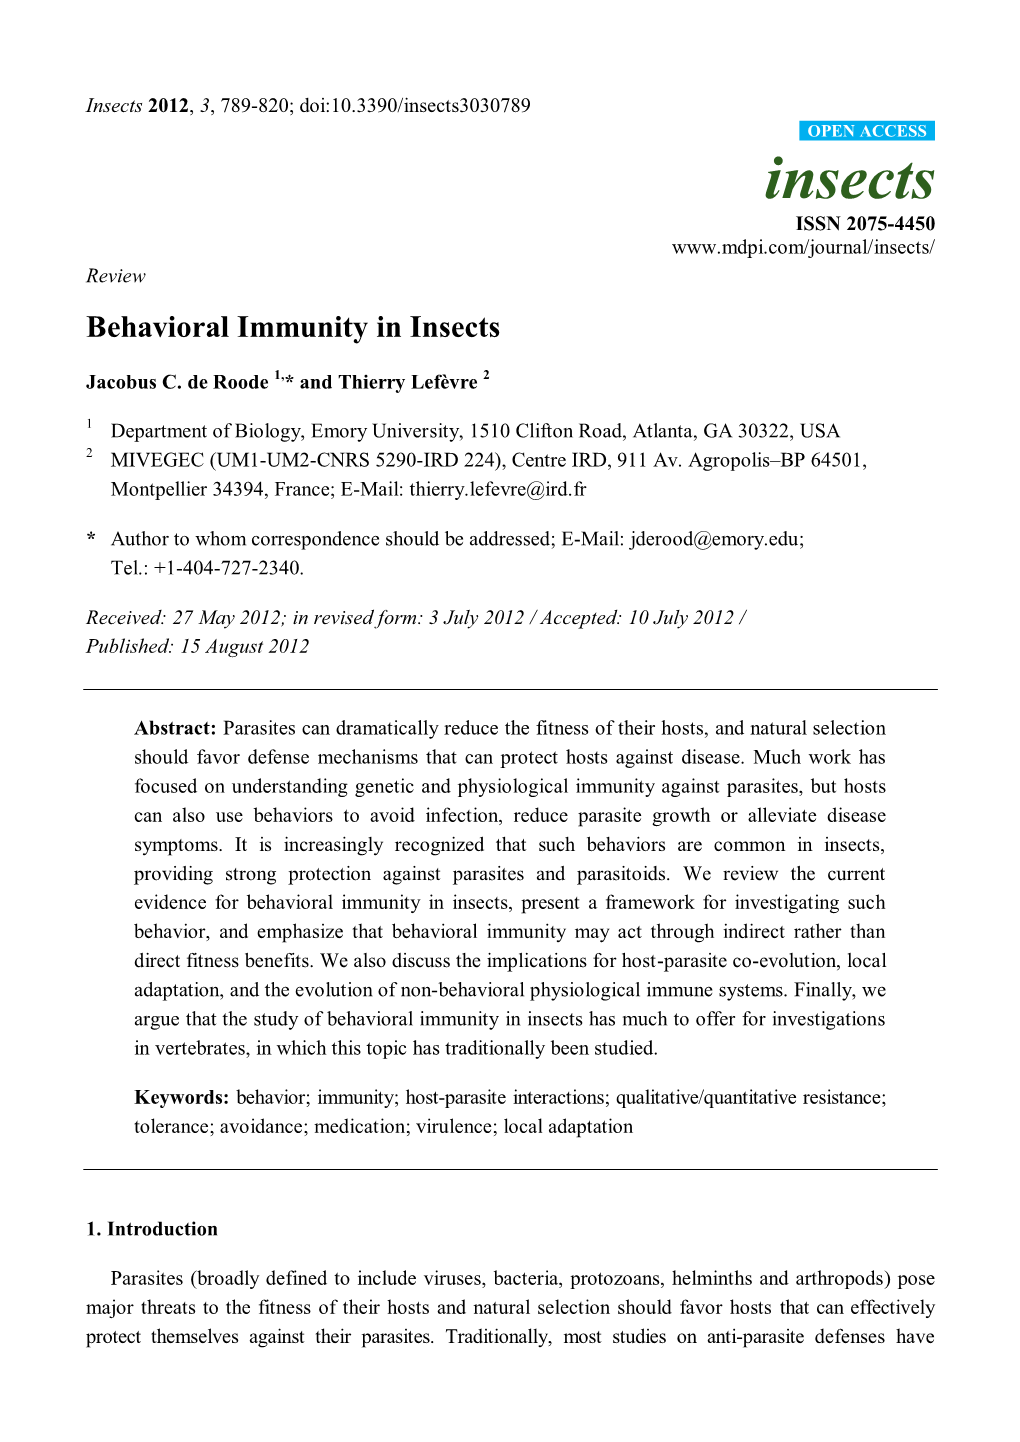 Behavioral Immunity in Insects